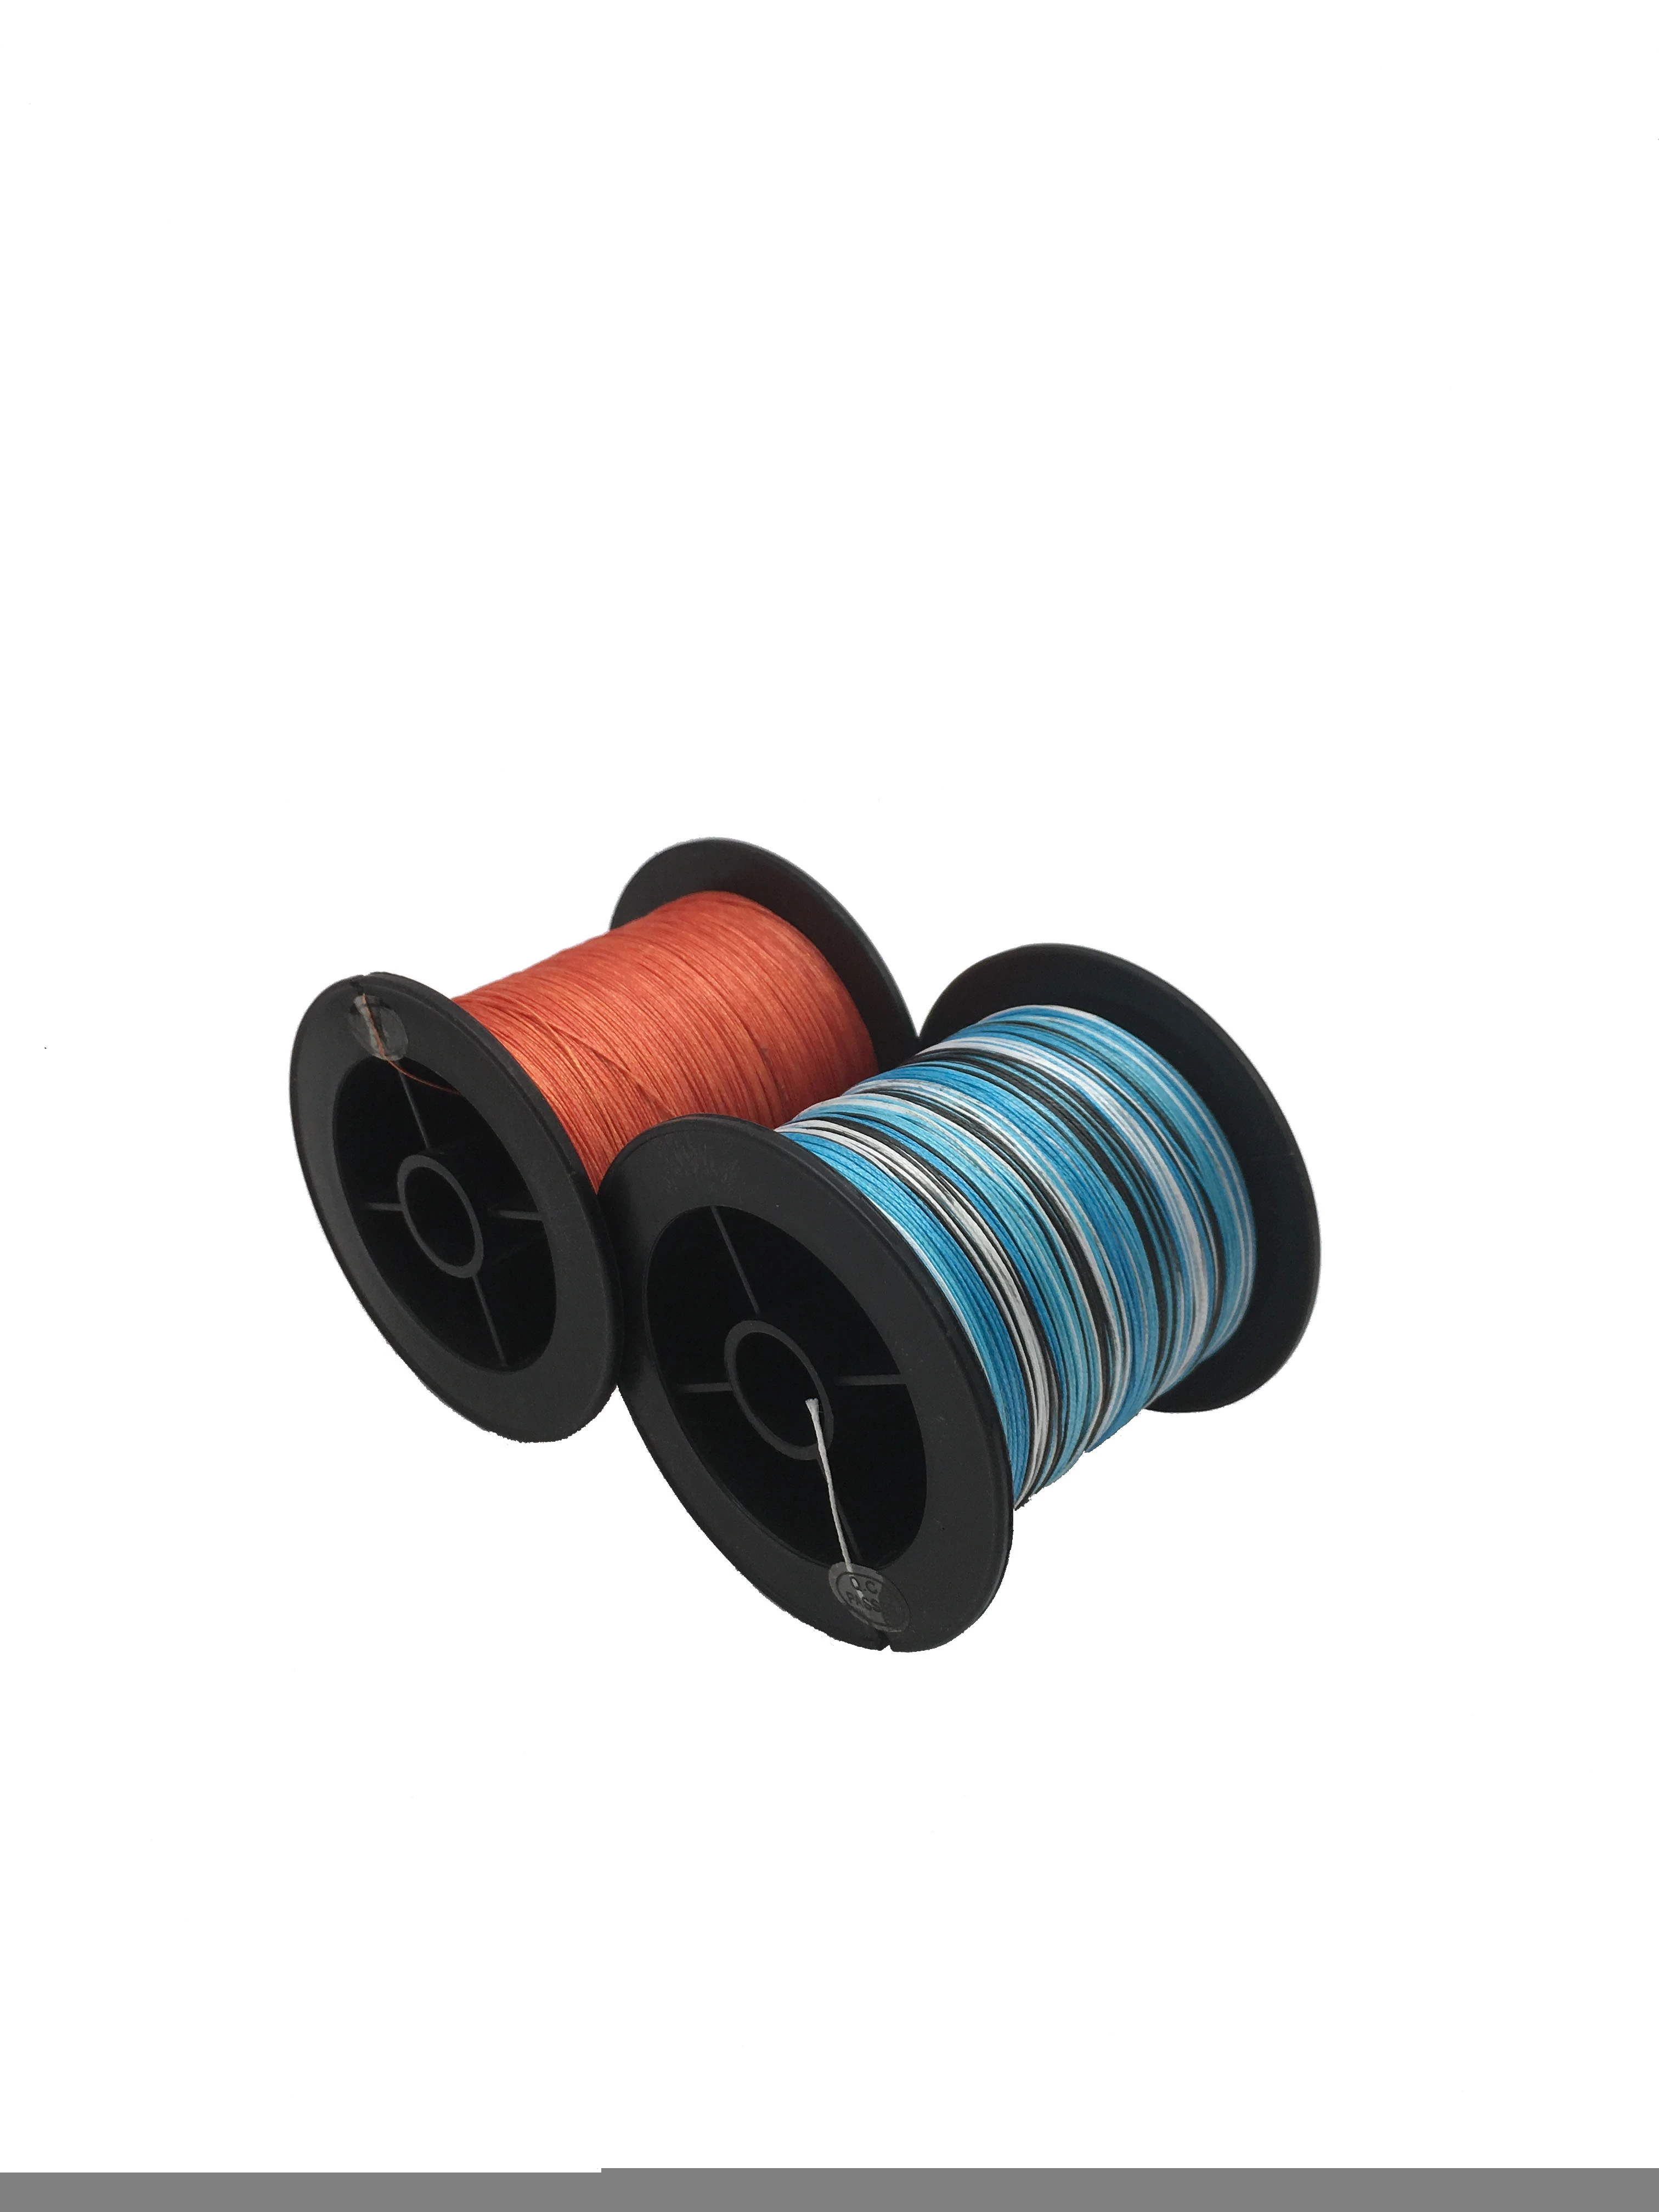 Newest Superior Performance Colorful Sink 4 Strands Fishing Equipment hand fishing line 100mm